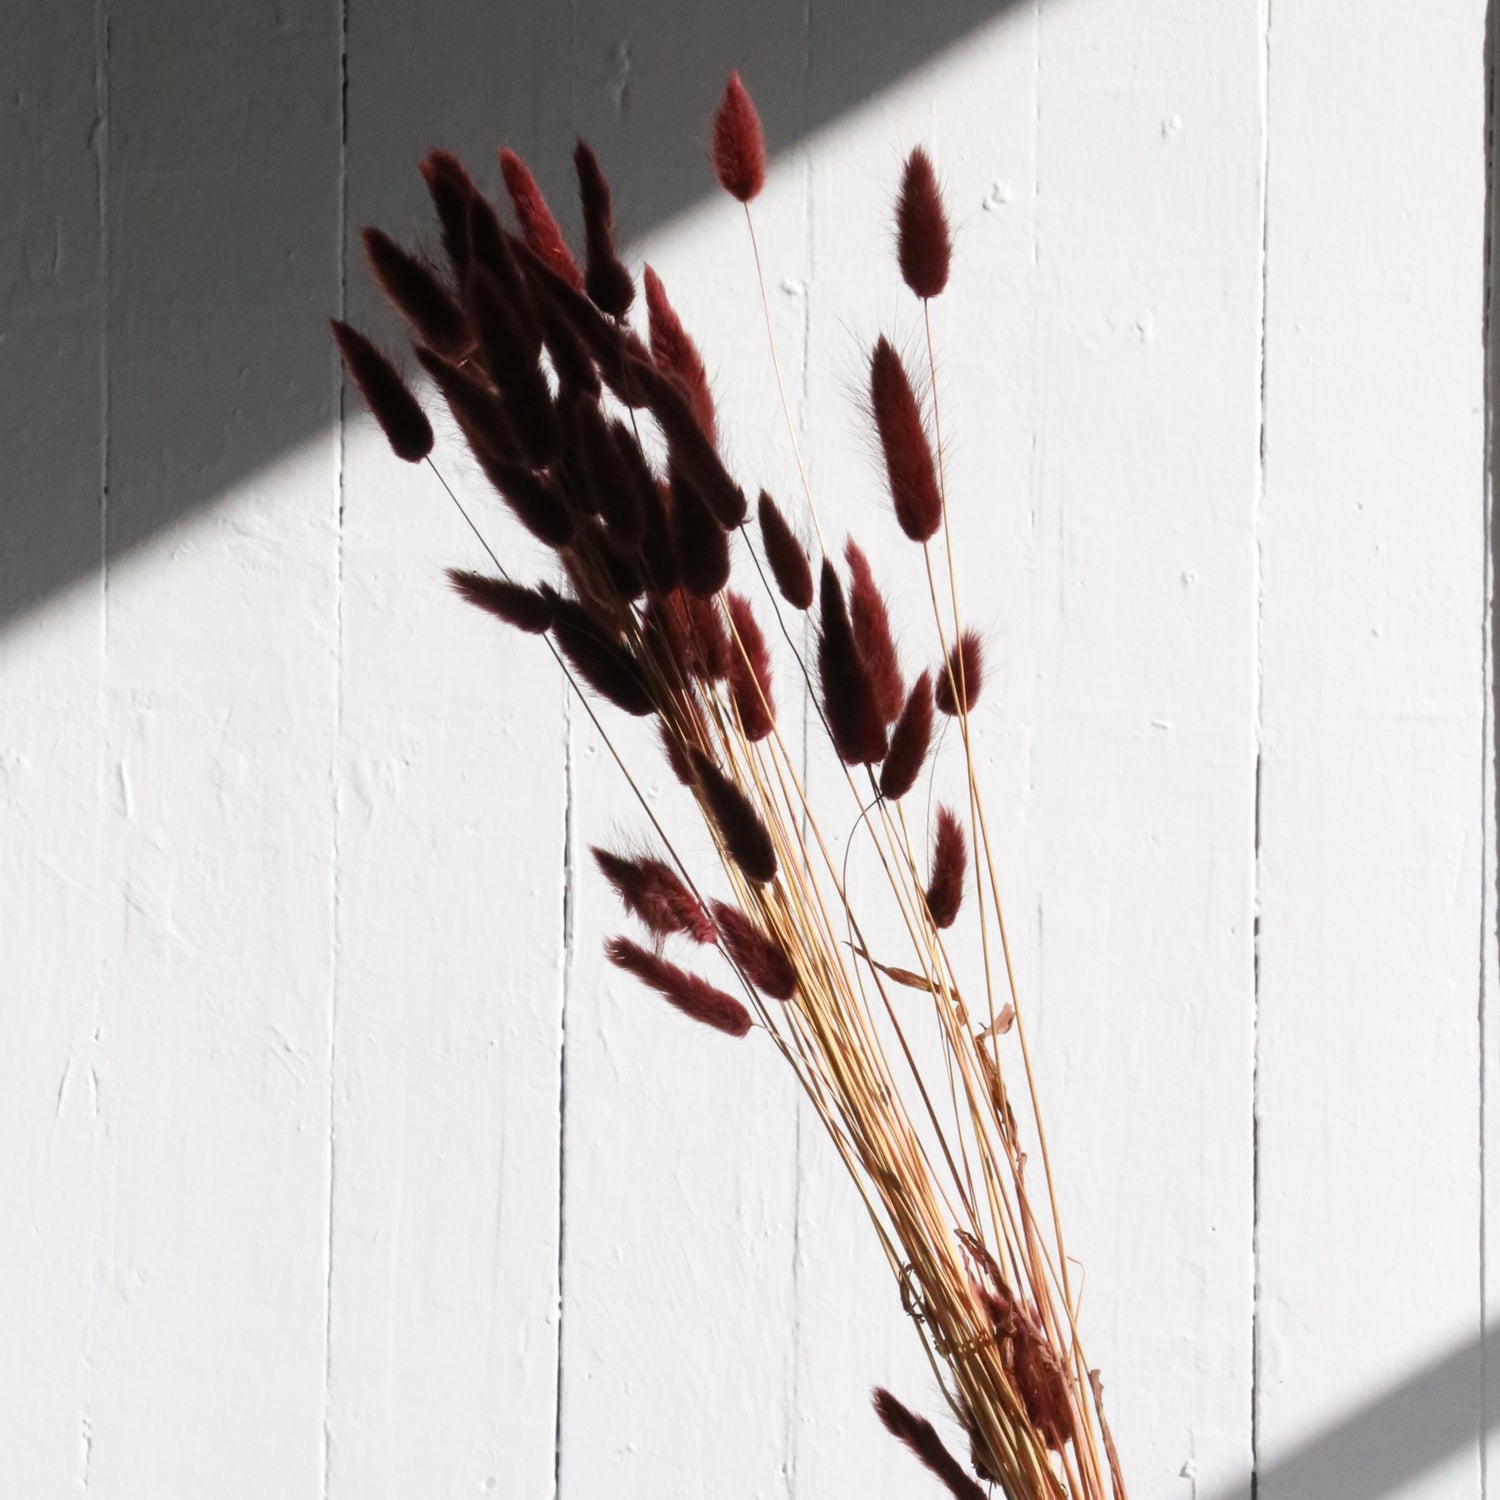 Dried brown bunny tail grass bunch available at Rook & Rose.